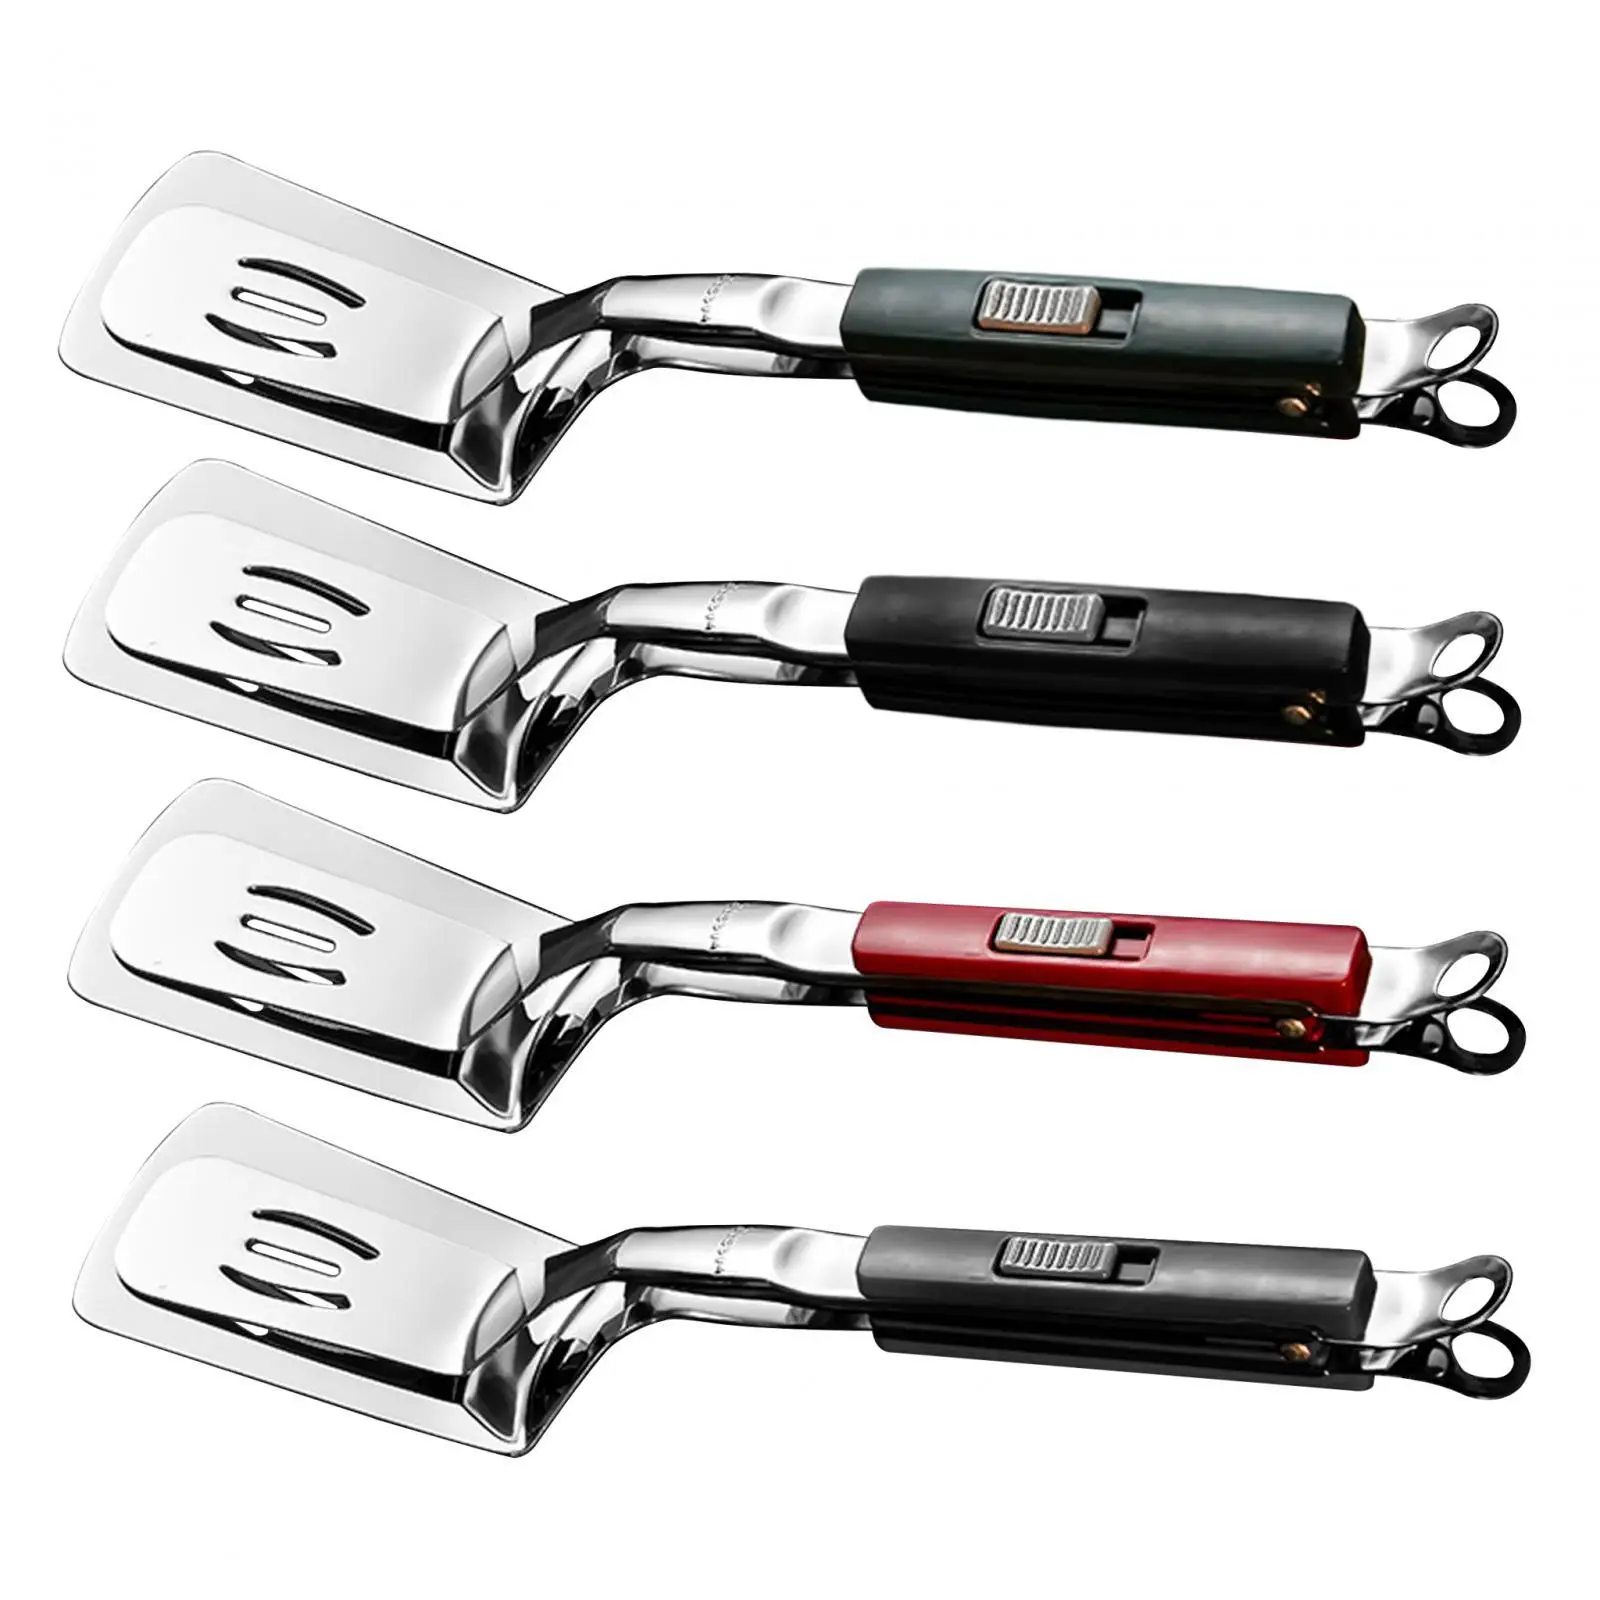 Stainless Steel Spatula Tongs Steak Clamps for Beef Steak Meat Pancakes